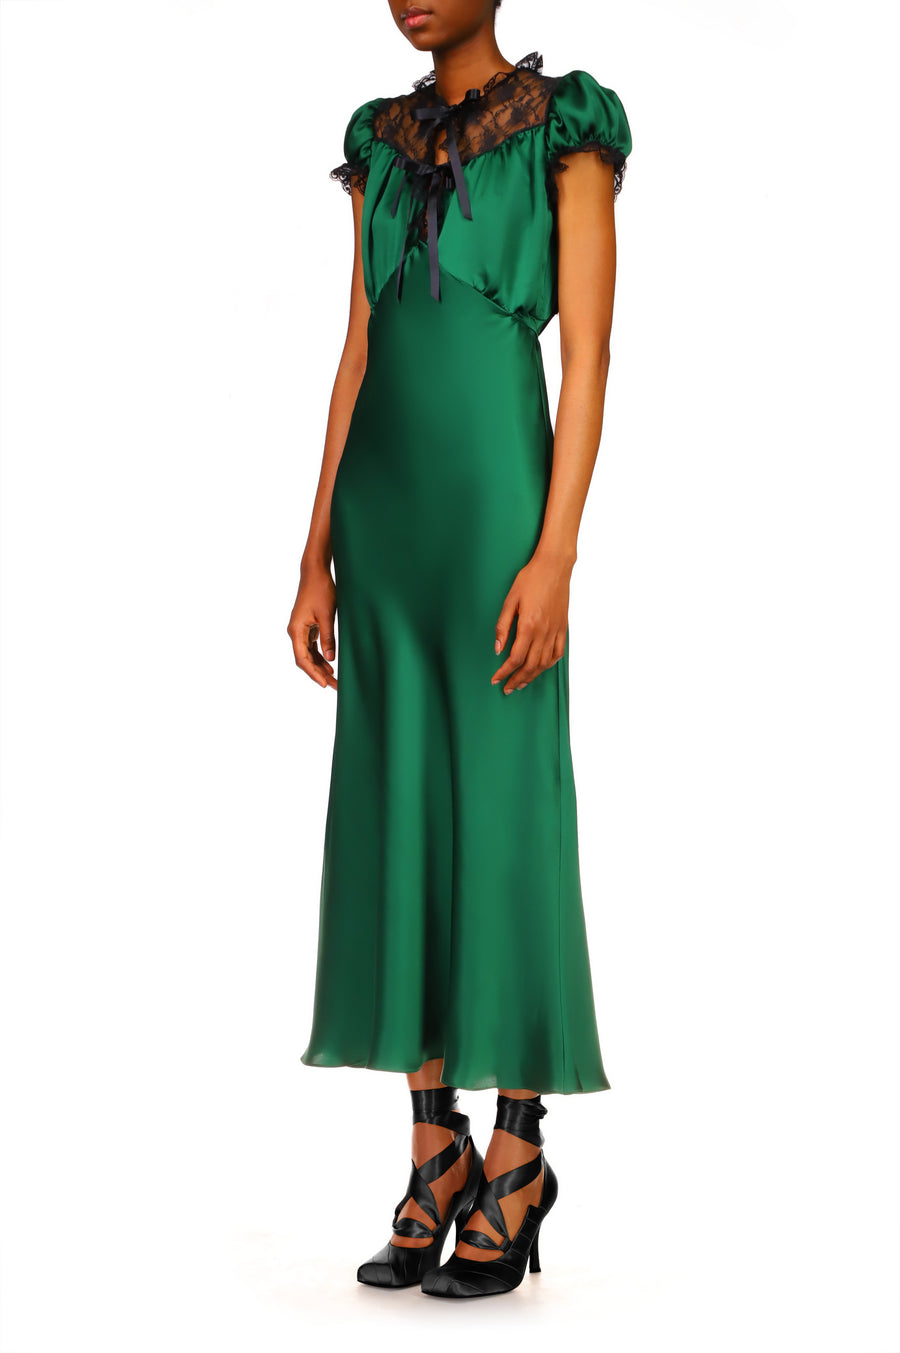 Green Silk Satin Bias Dress With Lace And Ruffle Details